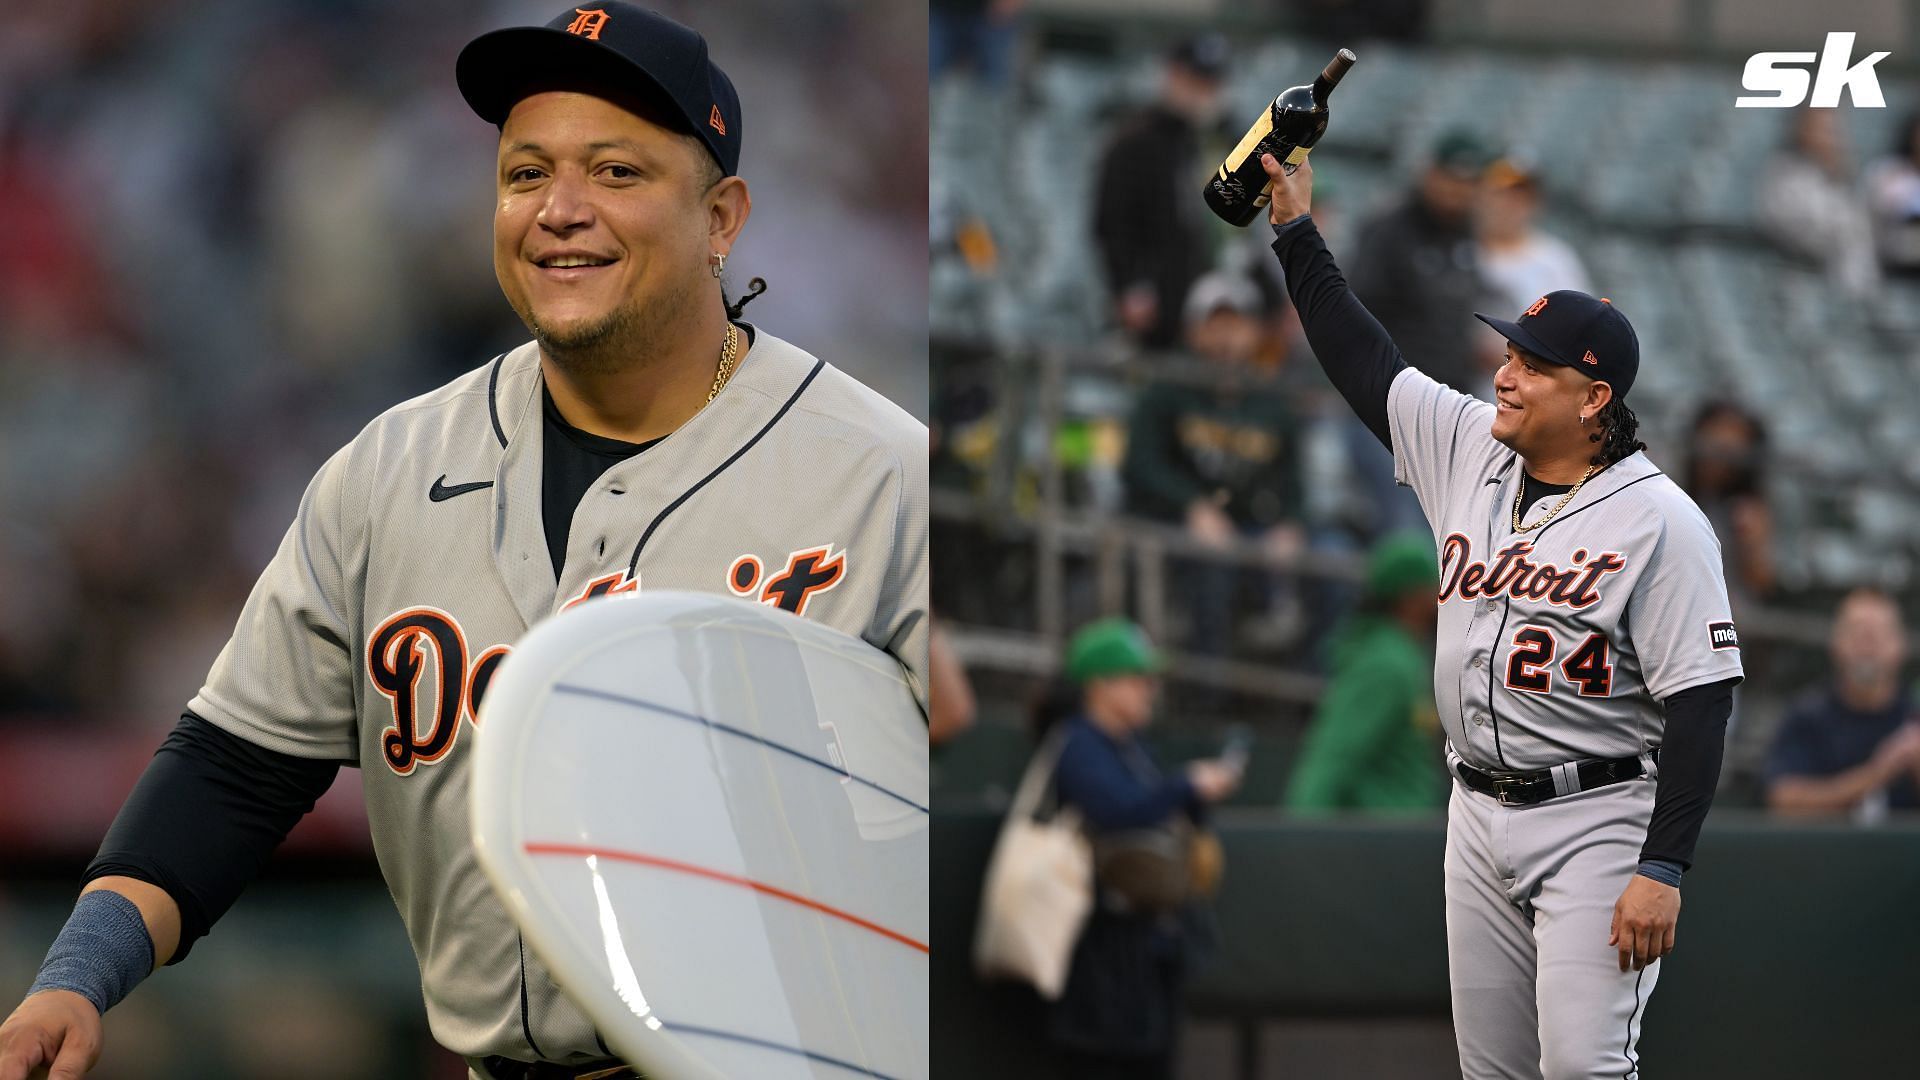 Retired member of the Detroit Tigers Miguel Cabrera